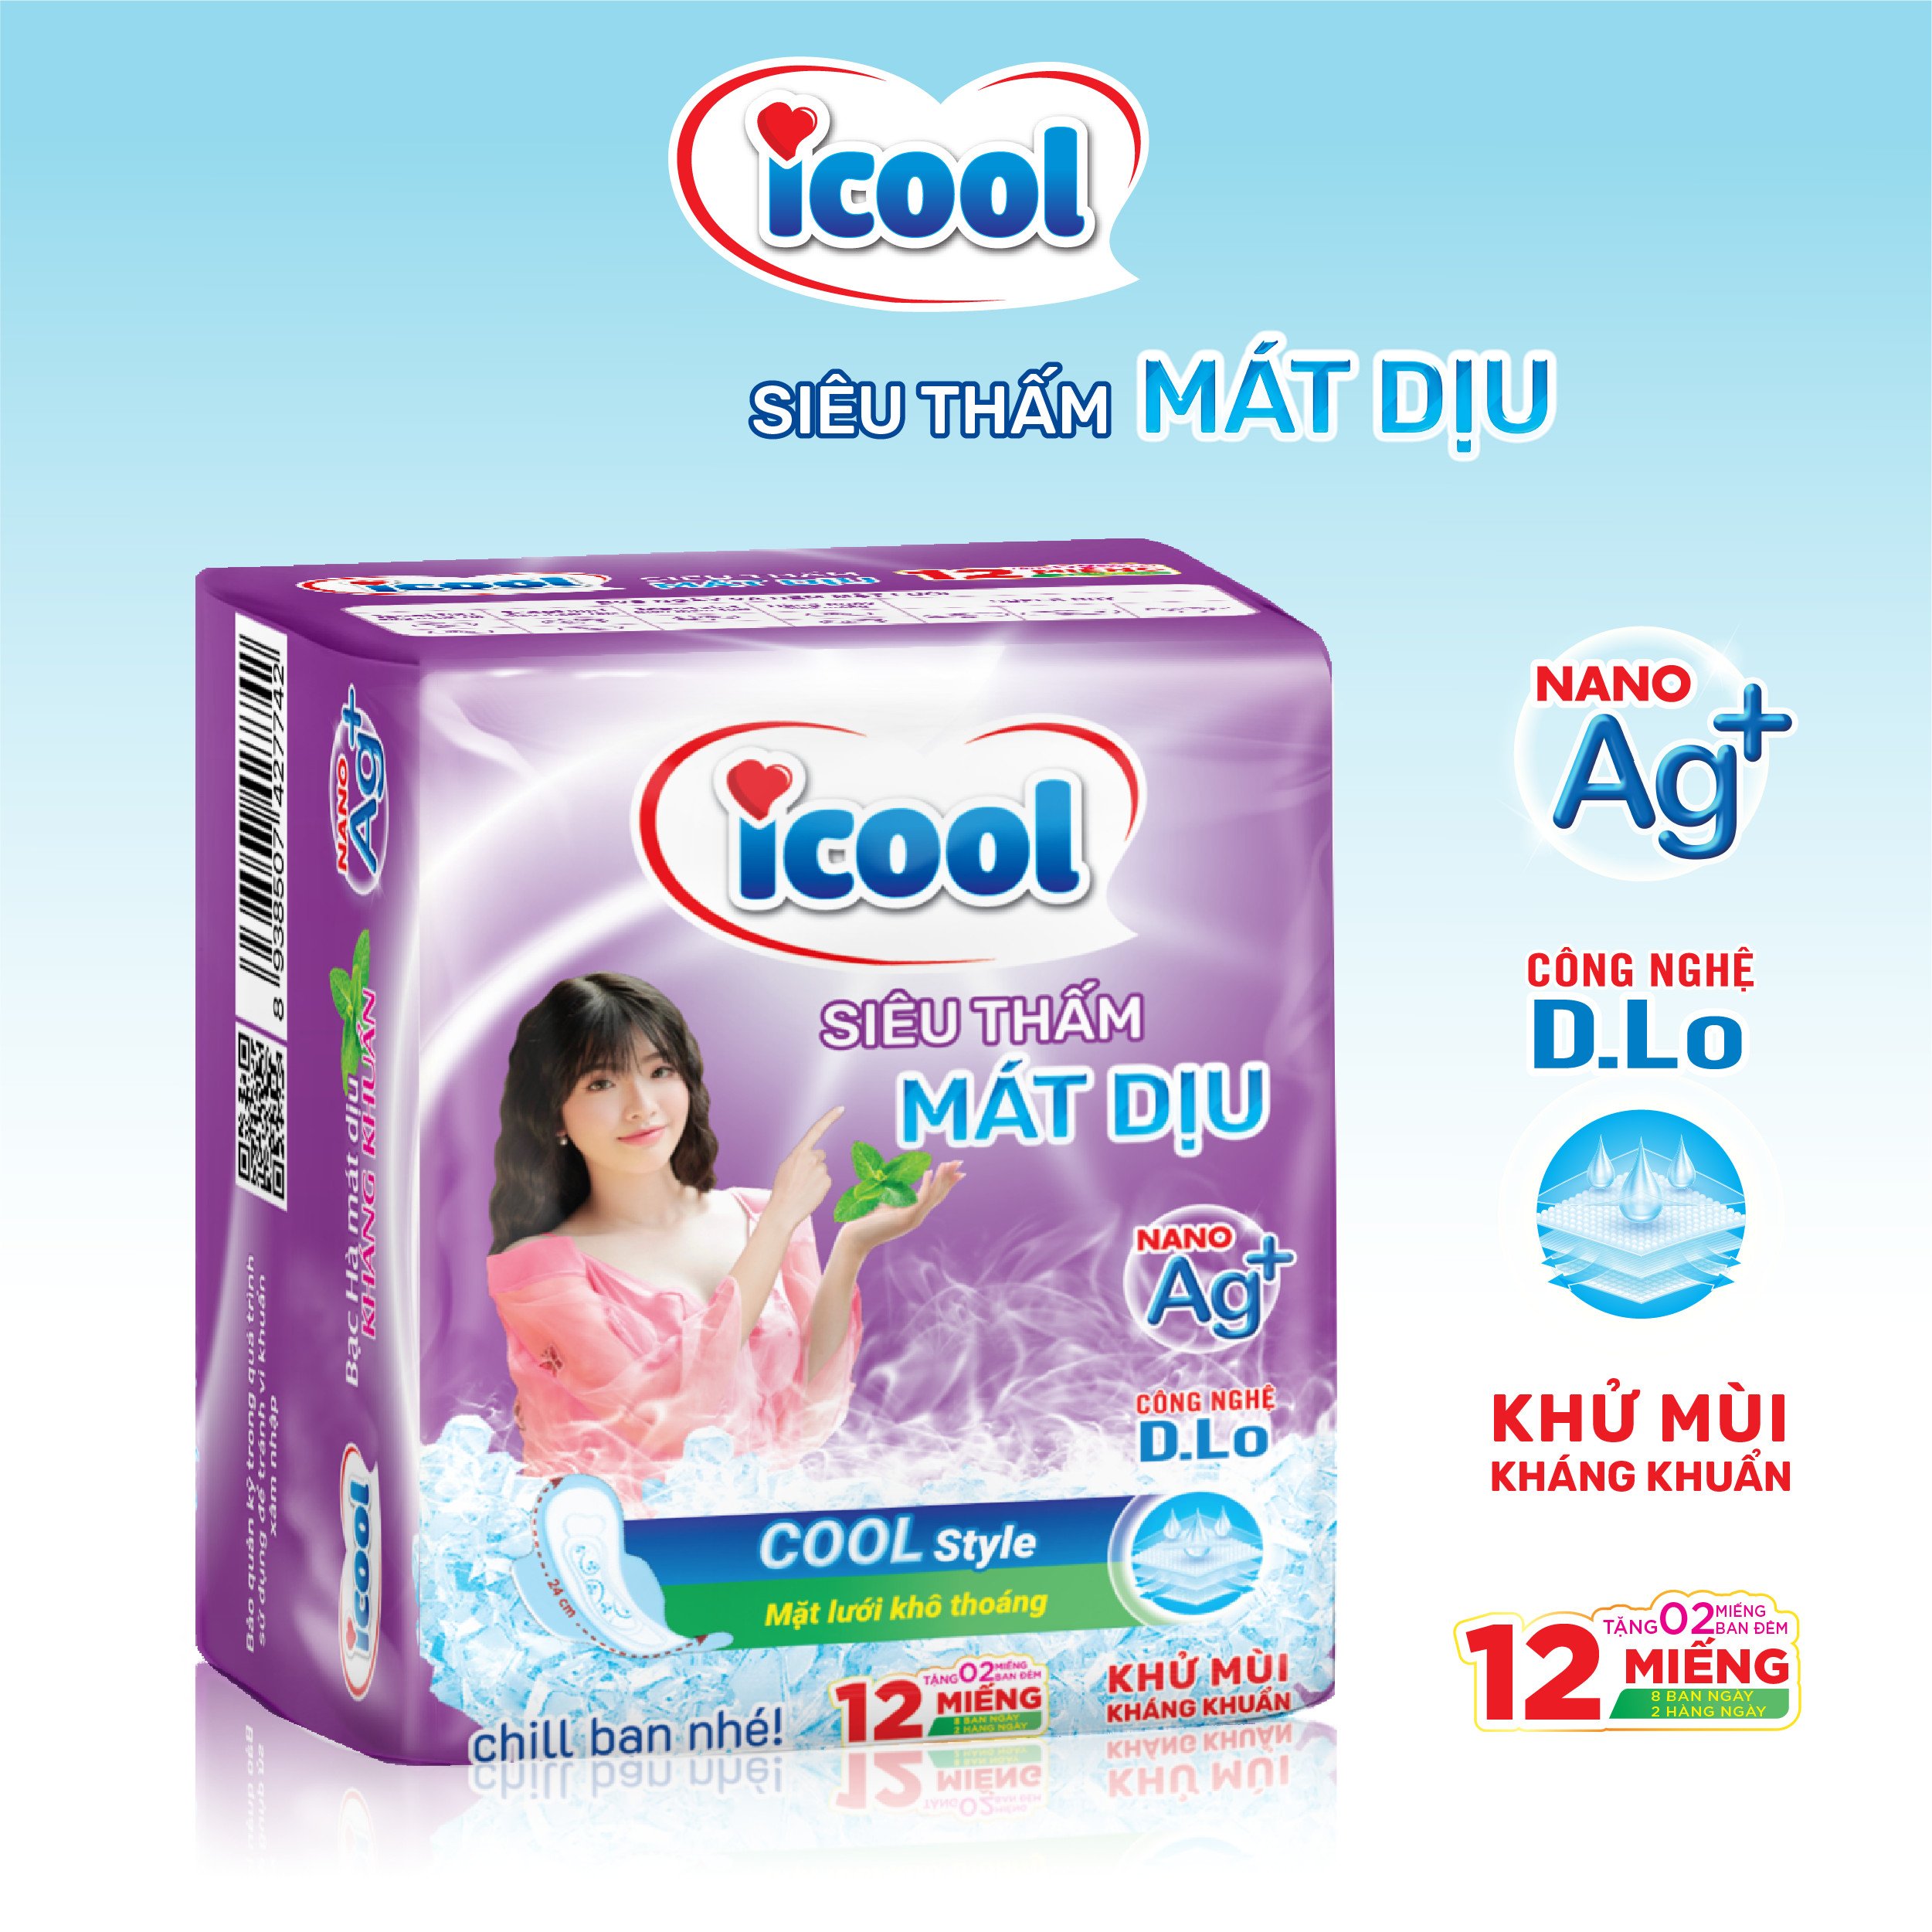 7-piece New Super absorbent pink icool sanitary napkins